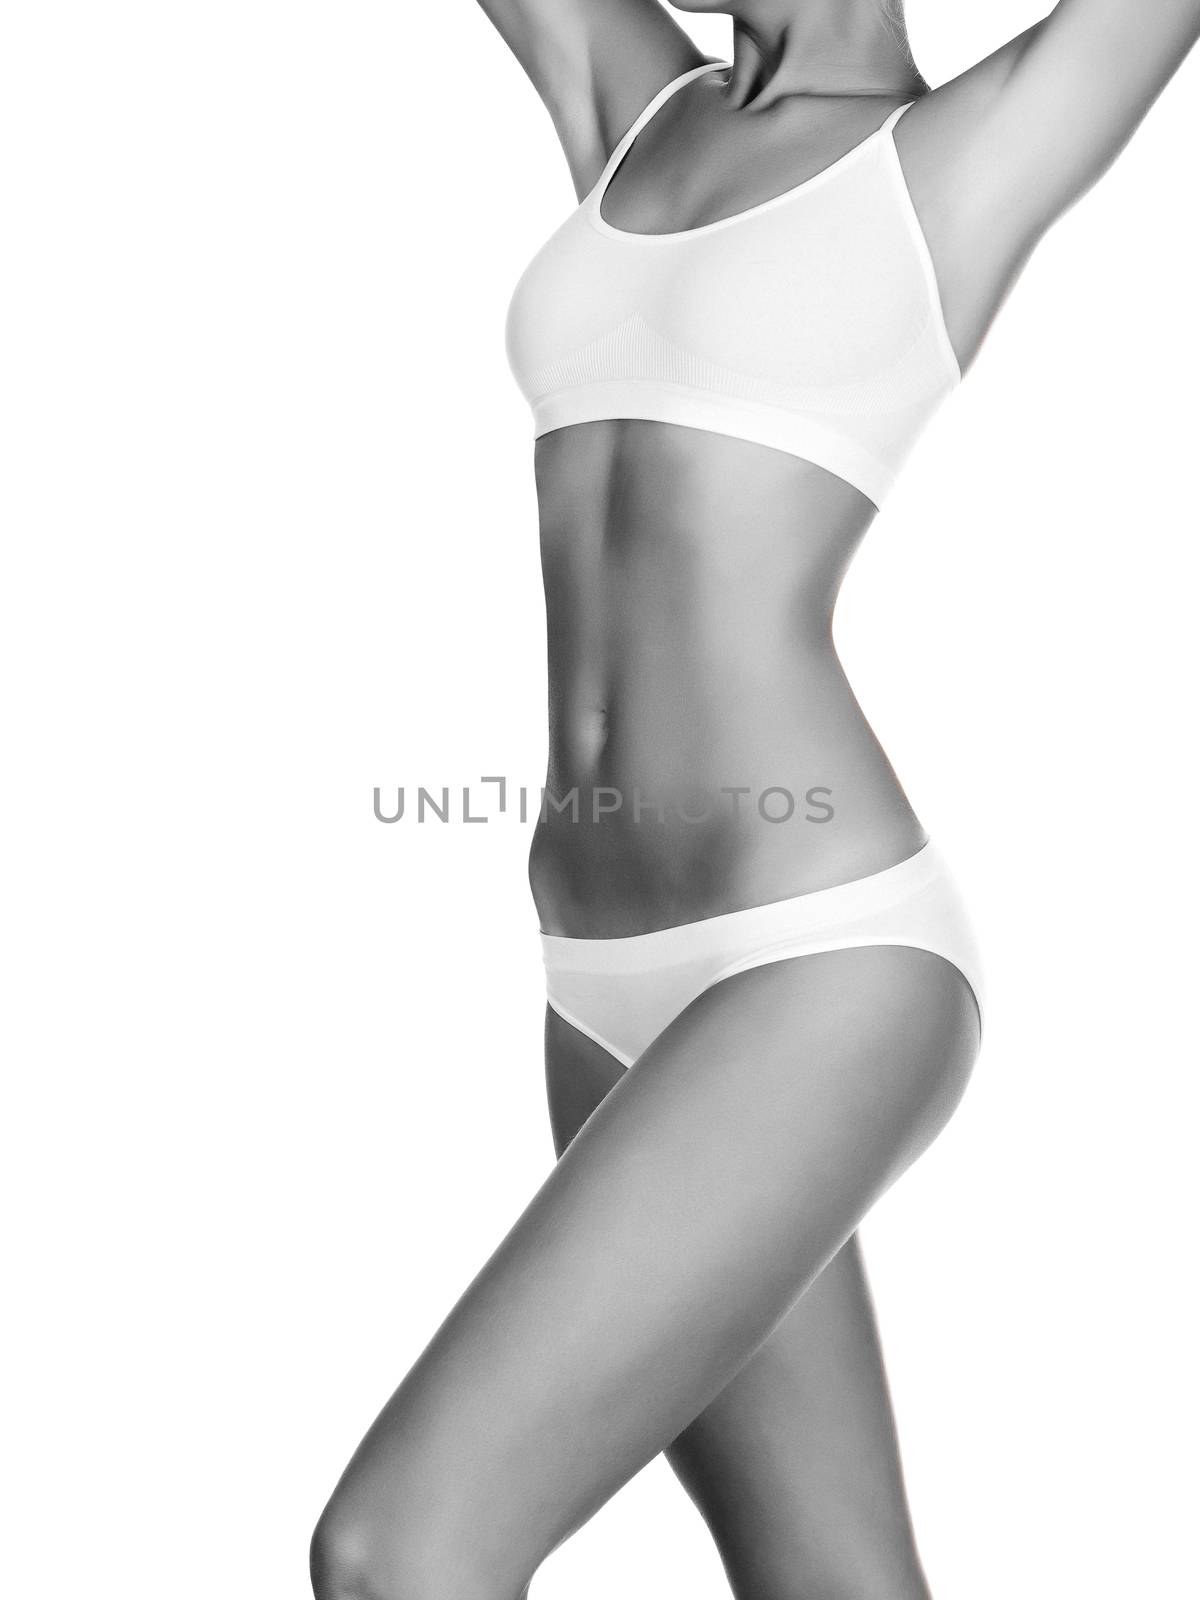 Slim woman on white background by Nobilior